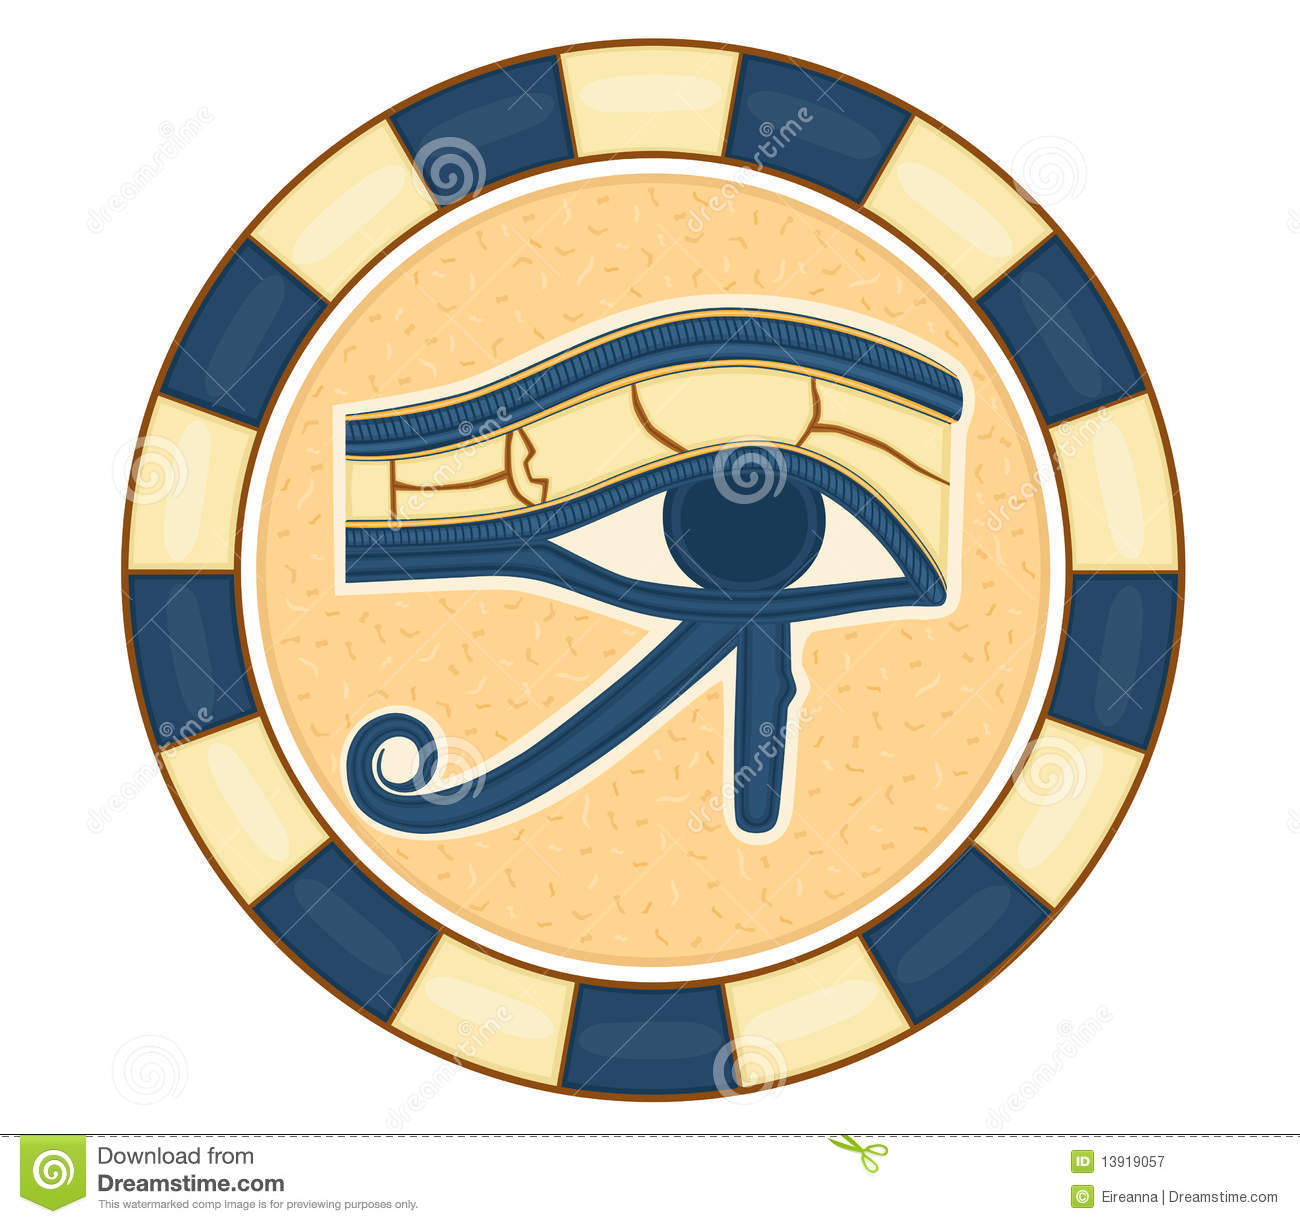 The Eye Of Horus  Eye Of Ra Wadjet  Believed By Ancient Egyptians To